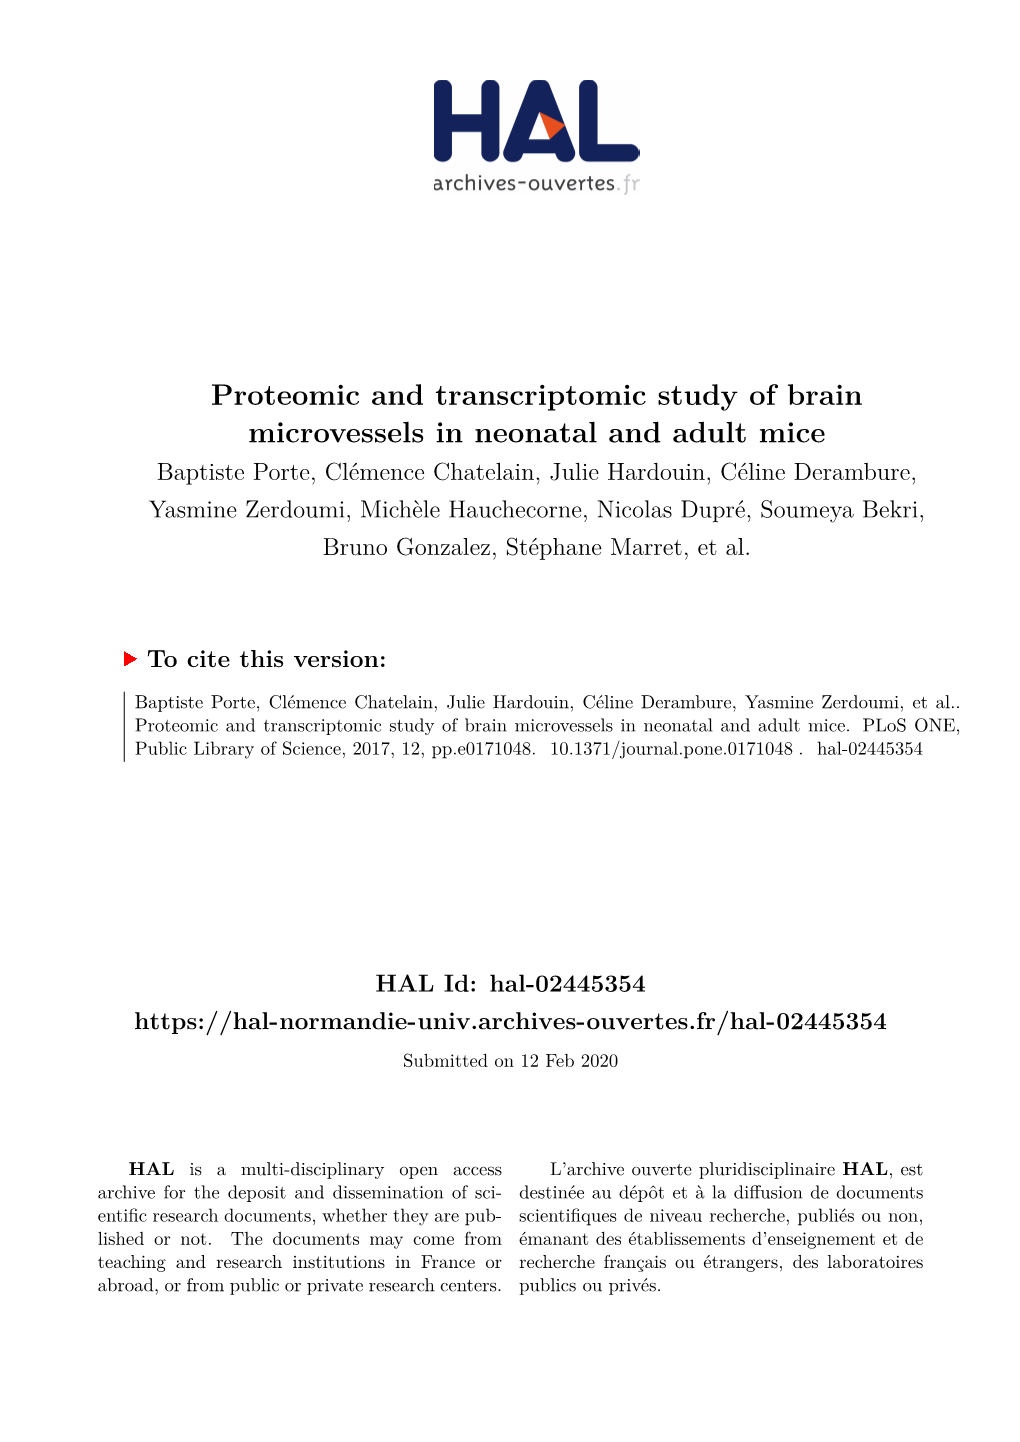 Proteomic and Transcriptomic Study of Brain Microvessels in Neonatal And